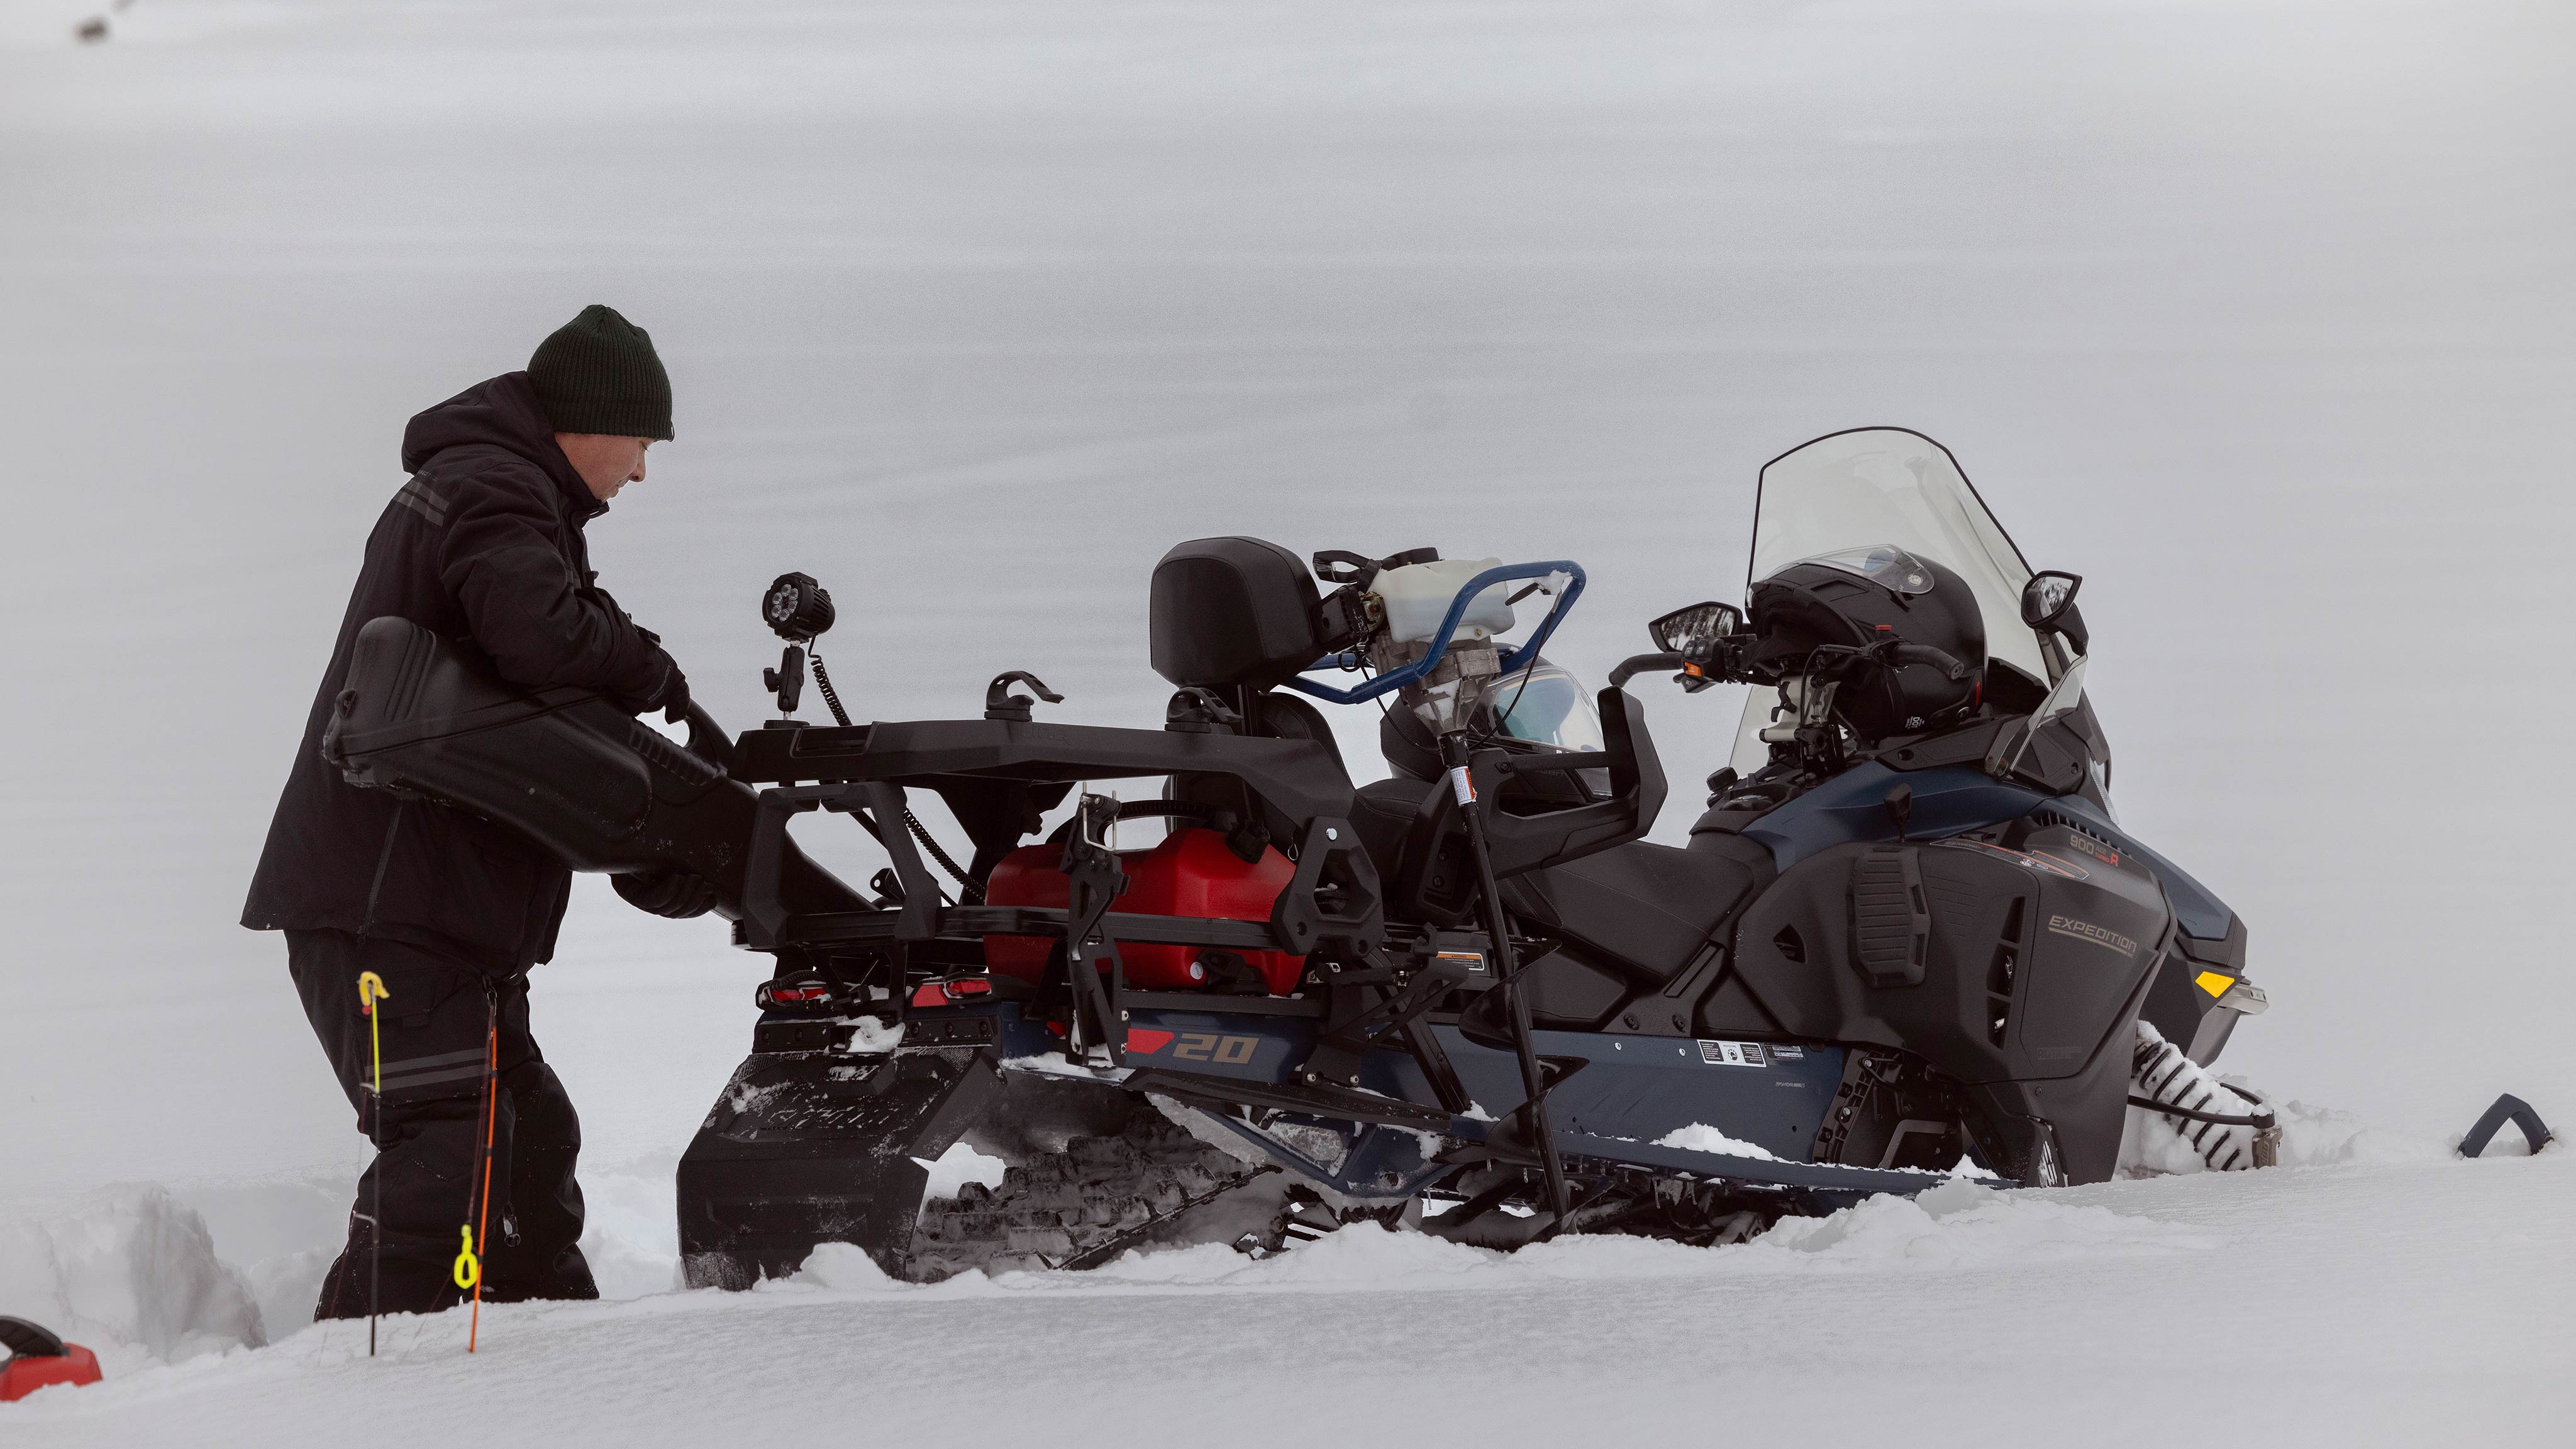 Rider storing items on his 2025 Ski-Doo Expedition snowmobile